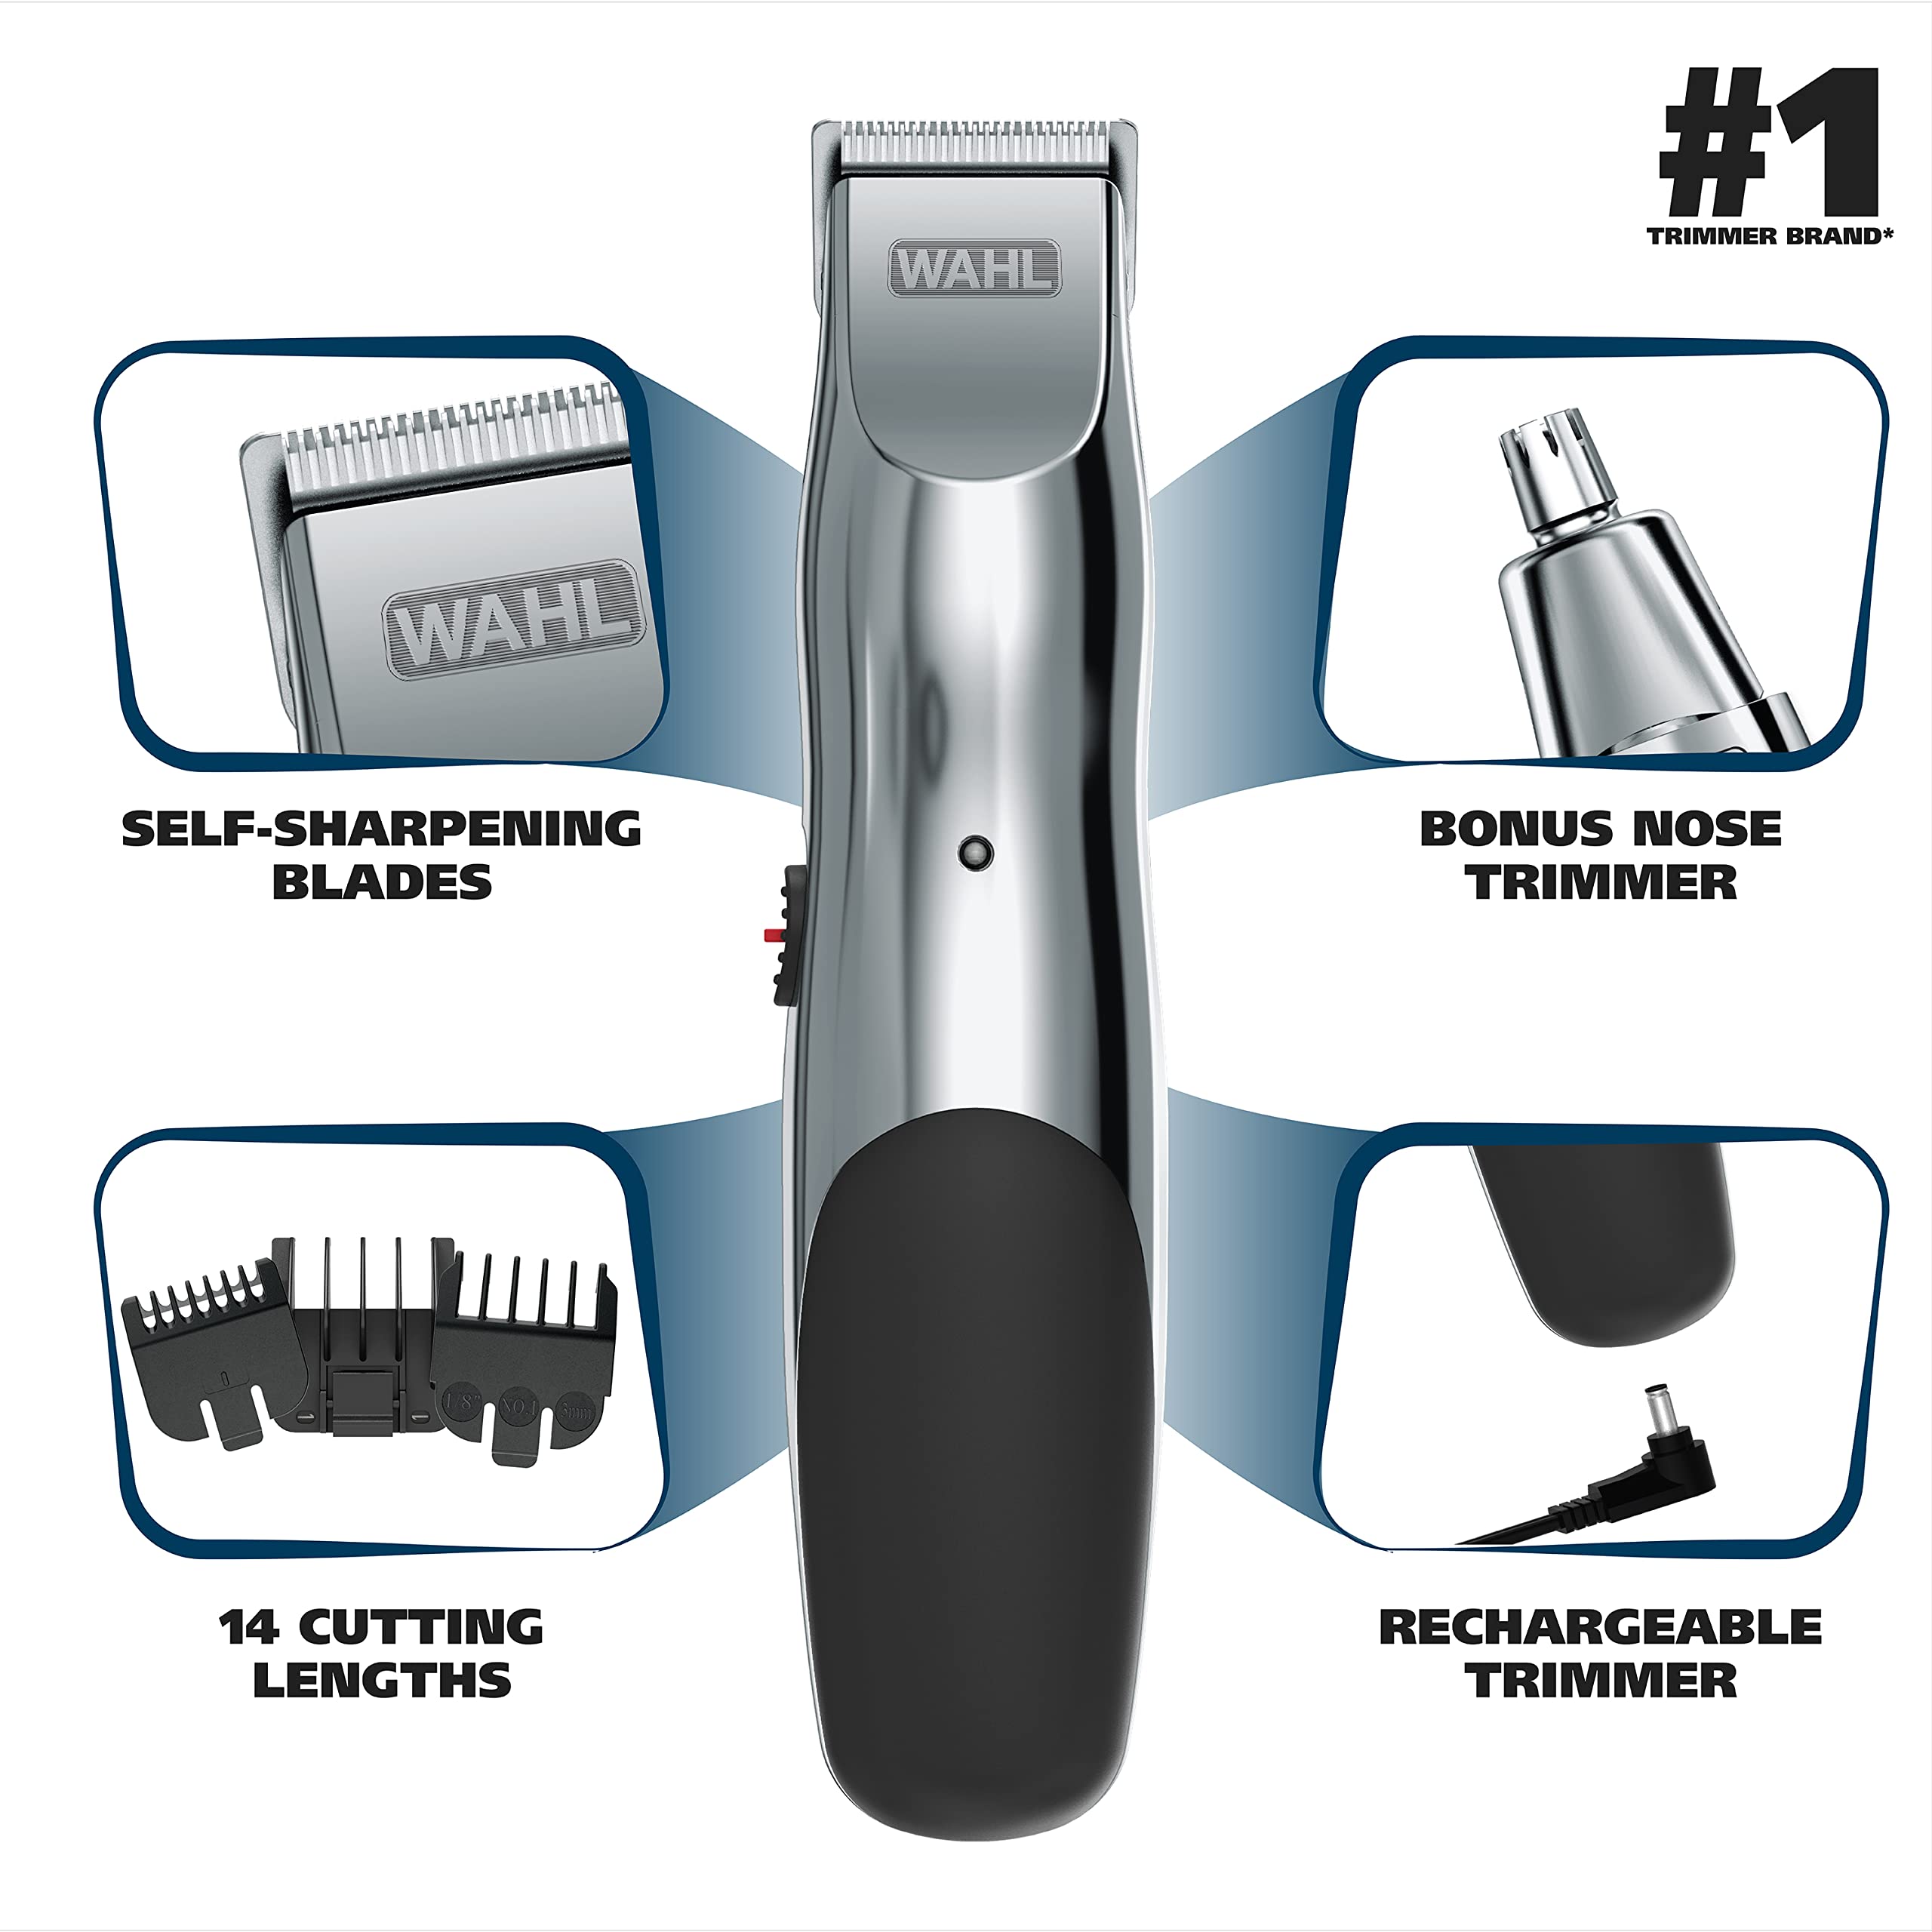 WAHL Groomsman Rechargeable Beard Trimmer kit for Mustaches, Nose Hair, and Light Detailing and Grooming with Bonus Wet/Dry Elec